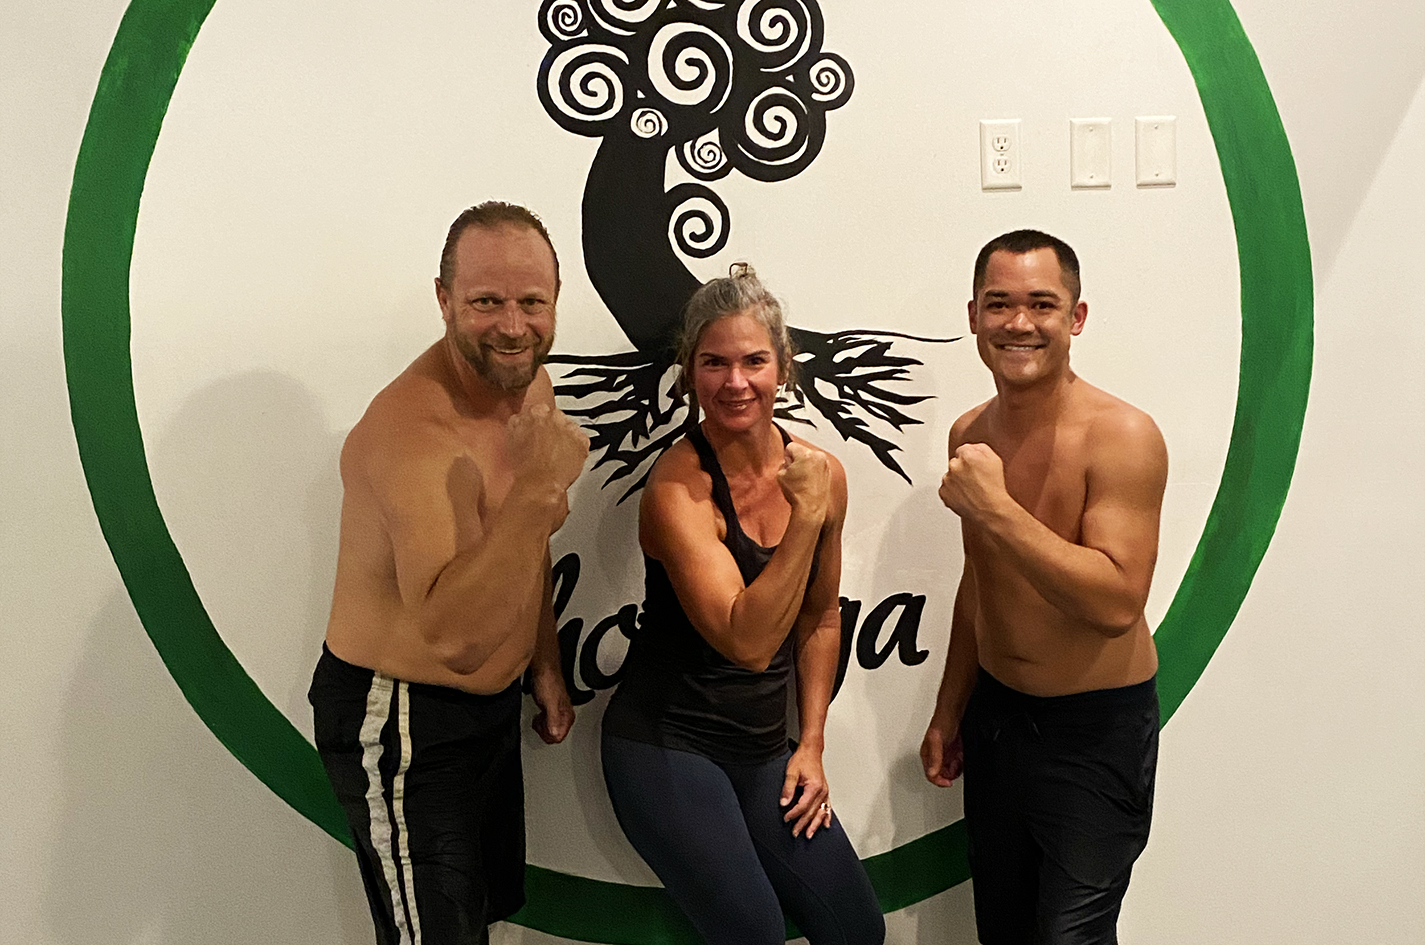 Spring 30 Day Yoga Challenge Winners! (and silent winners… committed nonetheless!)